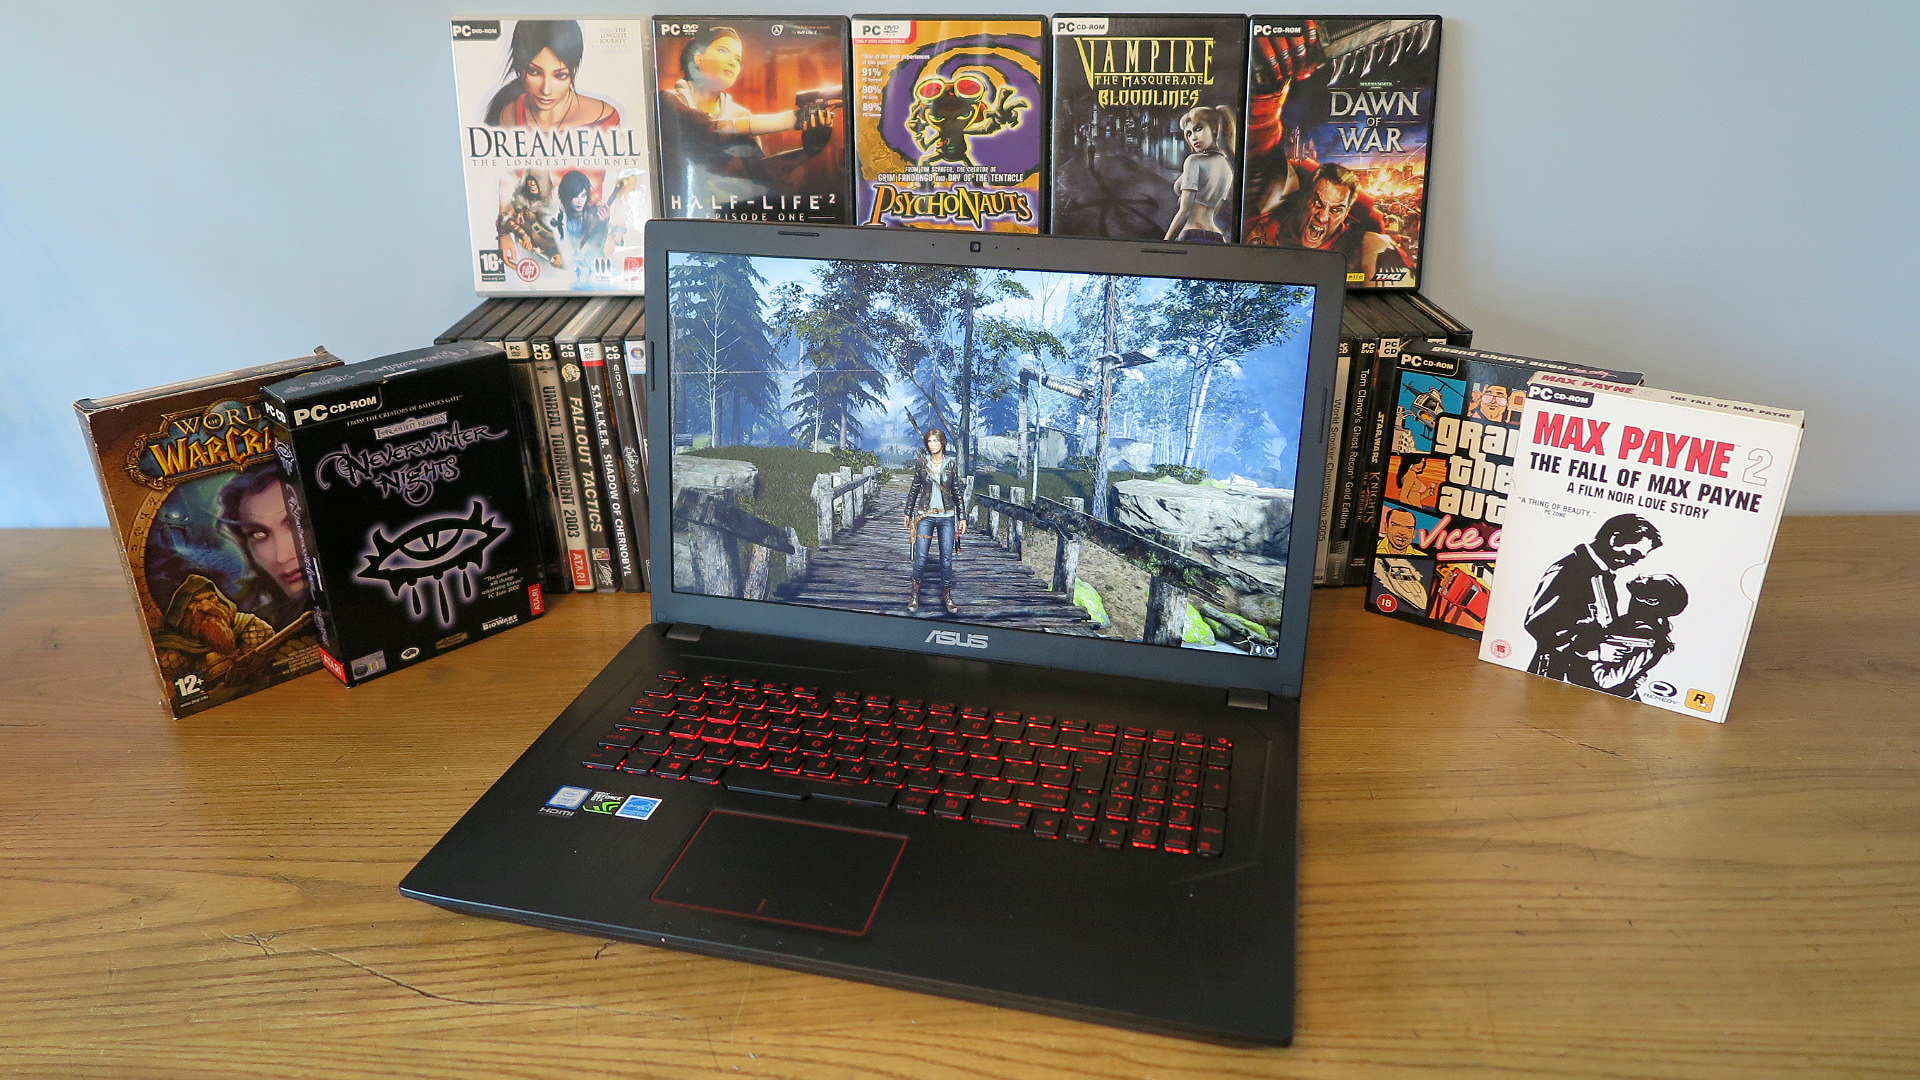 Asus ROG Strix ZX753VD-GC266T review: a good plug-and-play PC 